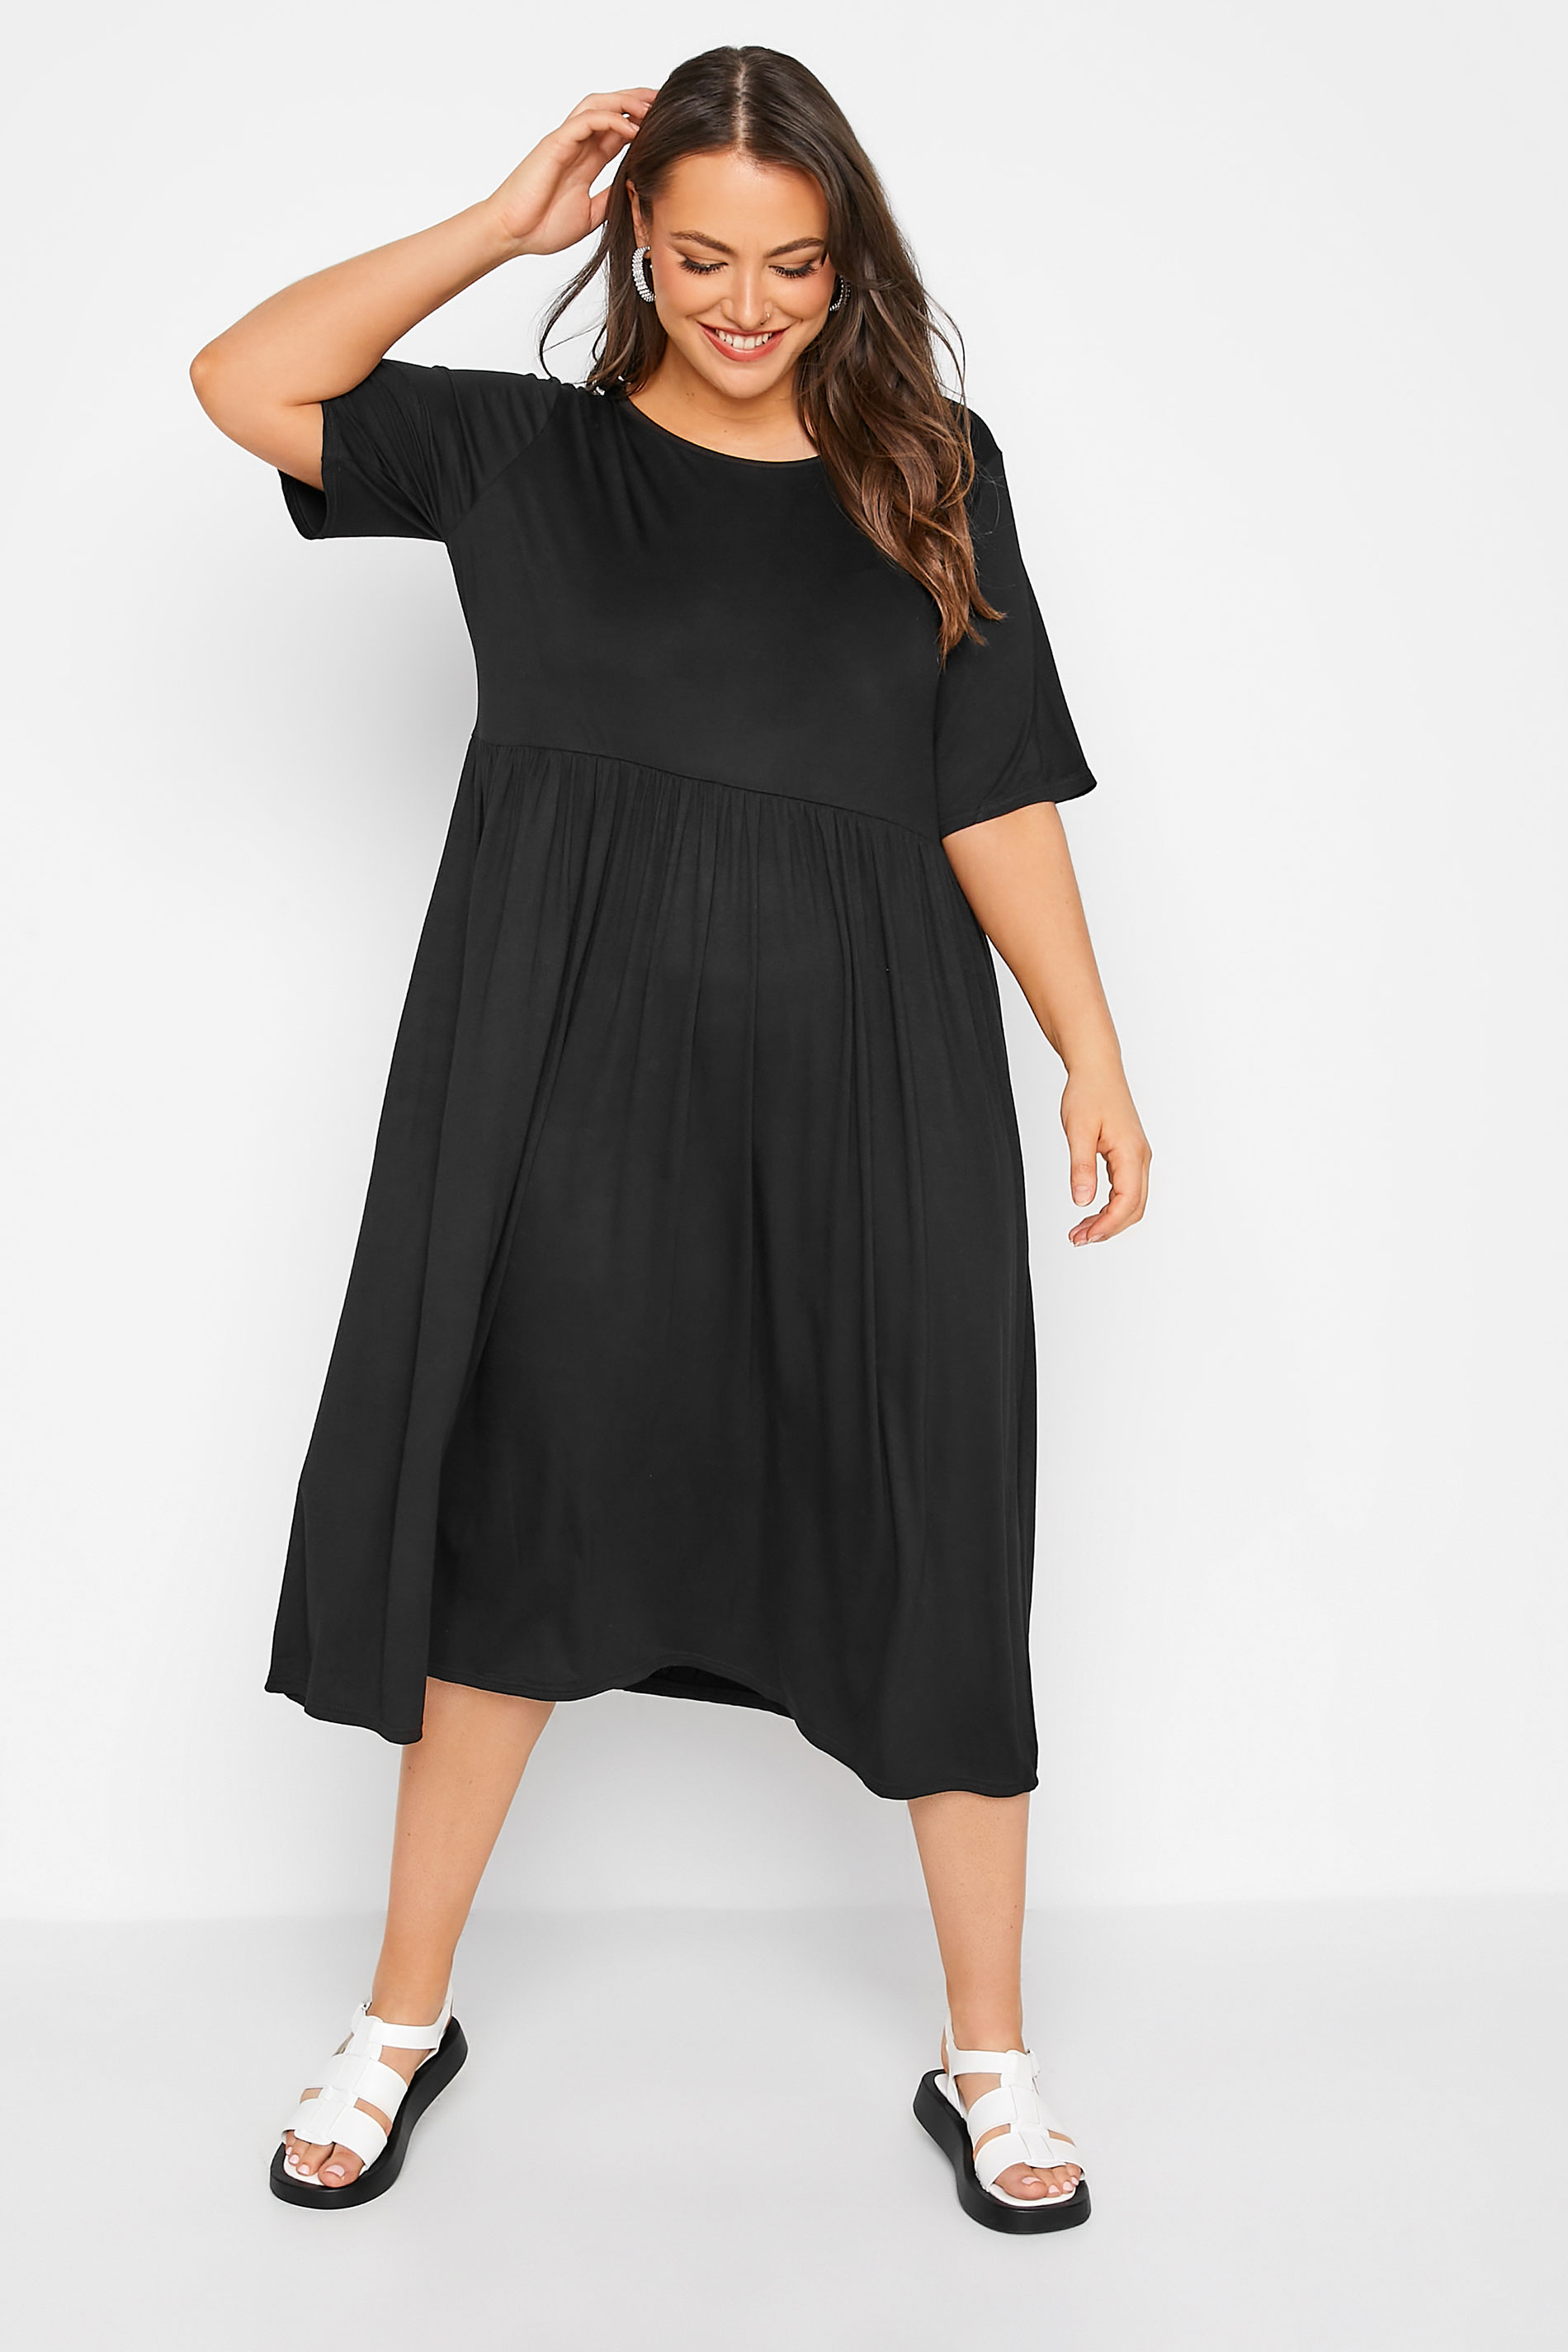 Robes Grande Taille Grande taille  Robes Smocké | LIMITED COLLECTION - Robe Midi Noire Design Uni - IY02735